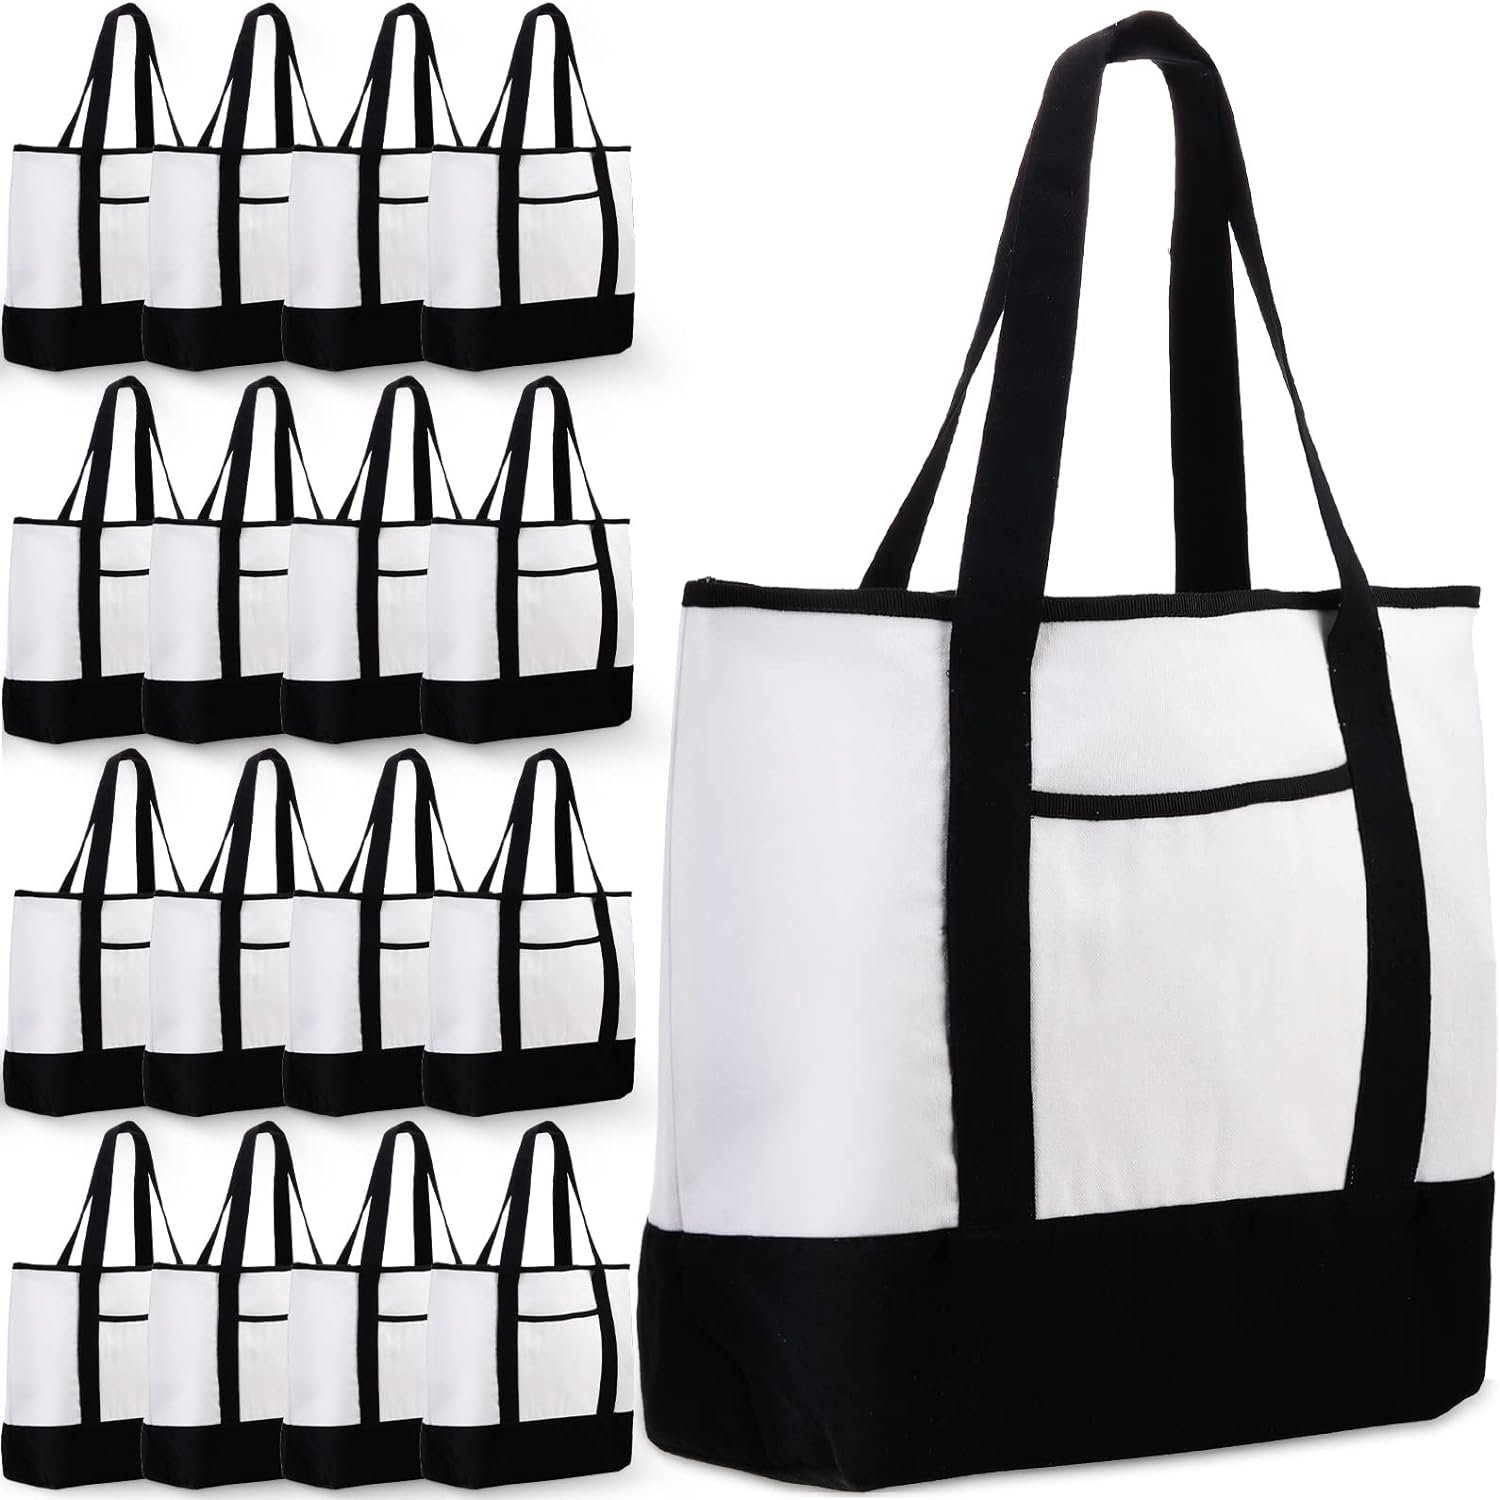 Reginary 16 Pcs Canvas Tote Bag Bulk with Outer Pocket, 18 Inch Cotton Large Tote Beach Bags Shopping Bags Tote Bag